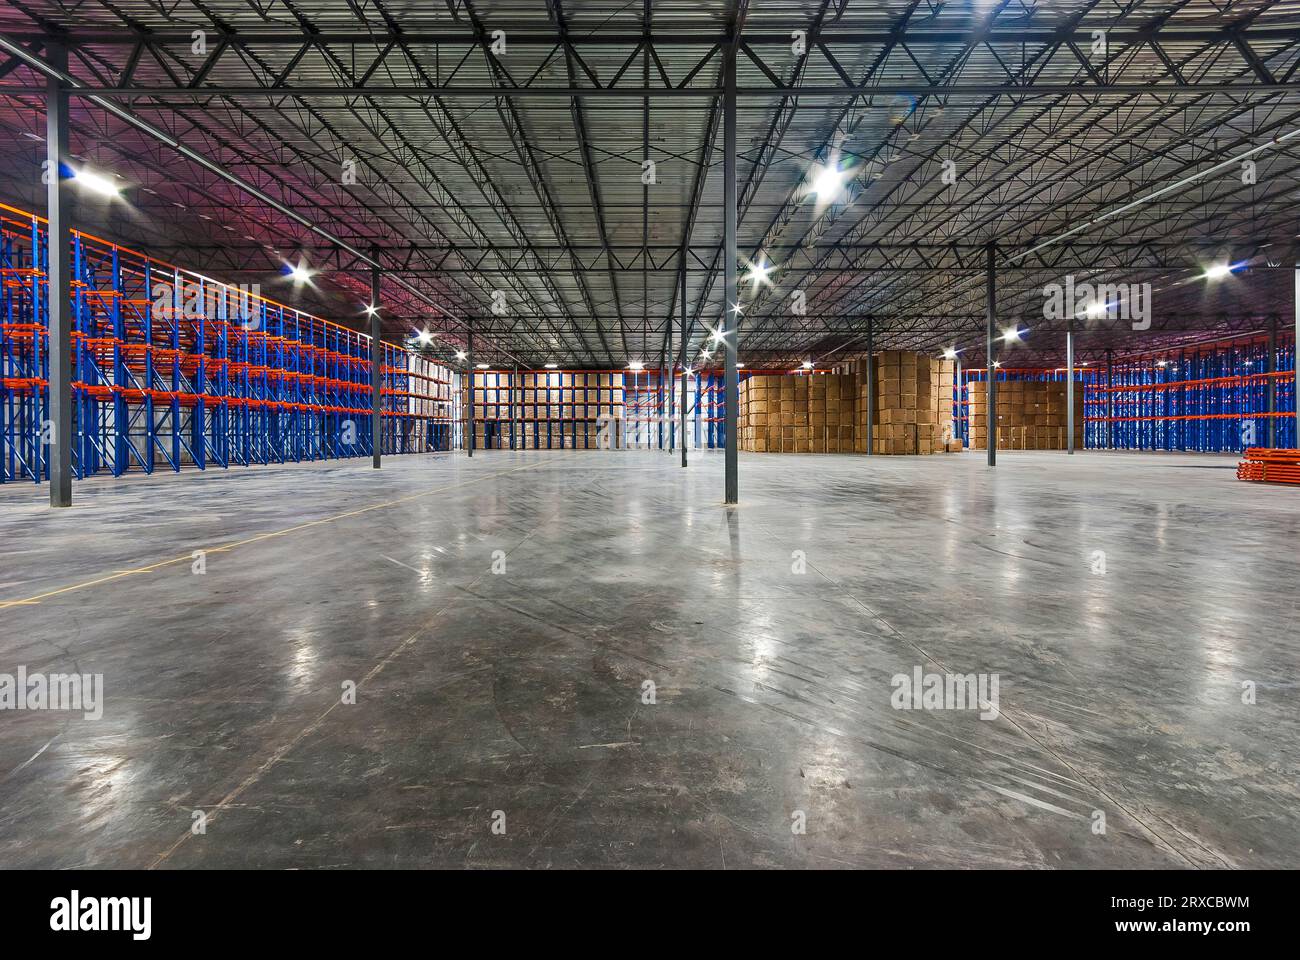 Interior of a large new commercial cold-storage (industrial refrigeration) freezer showing shelving and concrete floor. Stock Photo